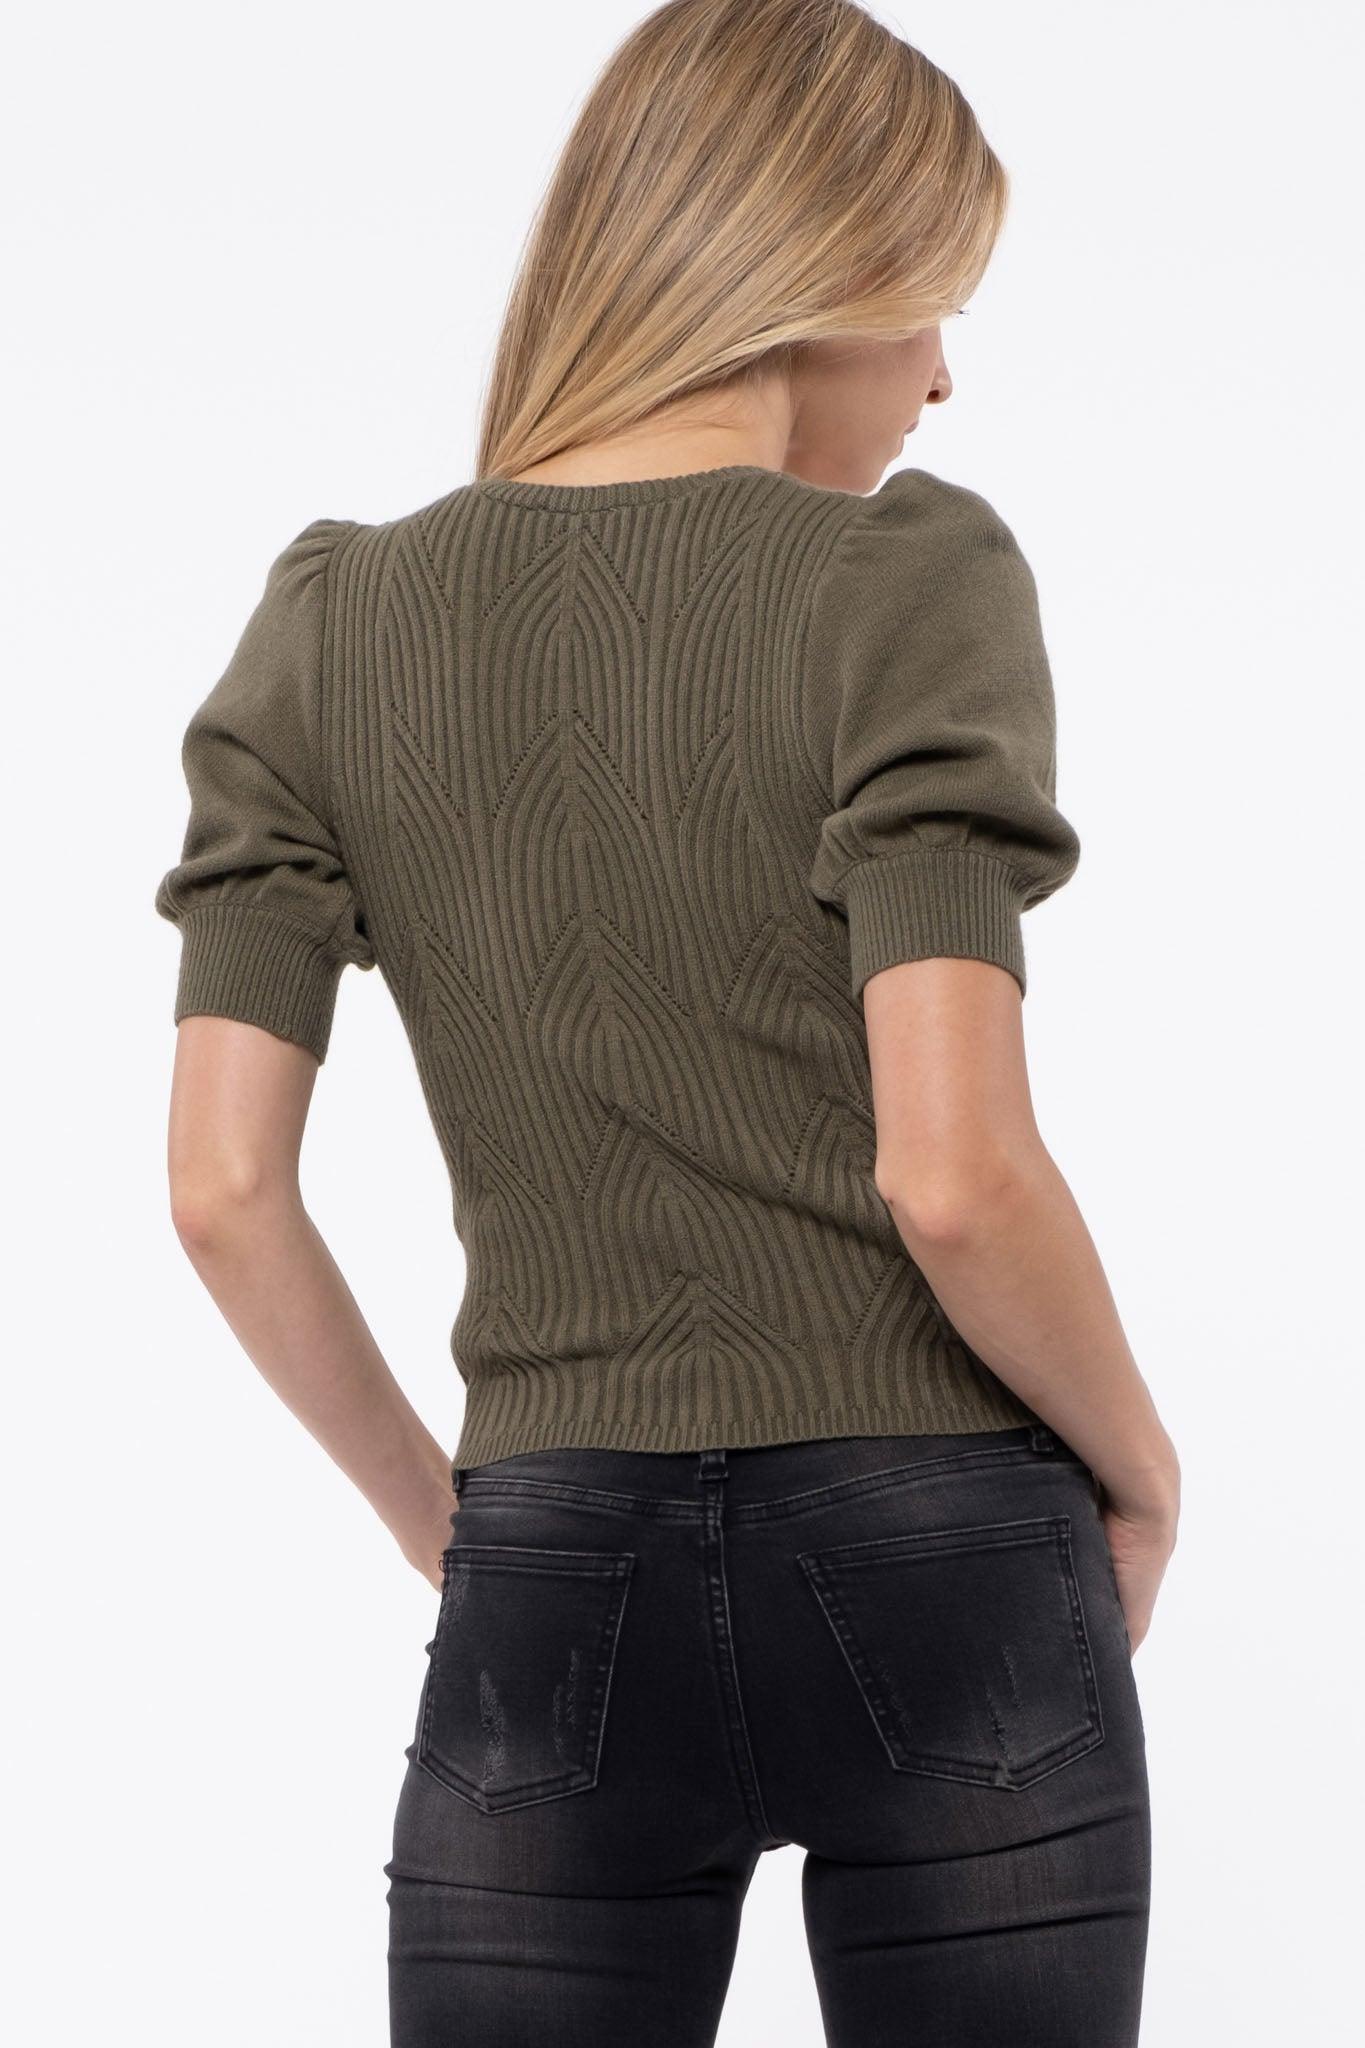 v-neck short sleeve sweater - RK Collections Boutique